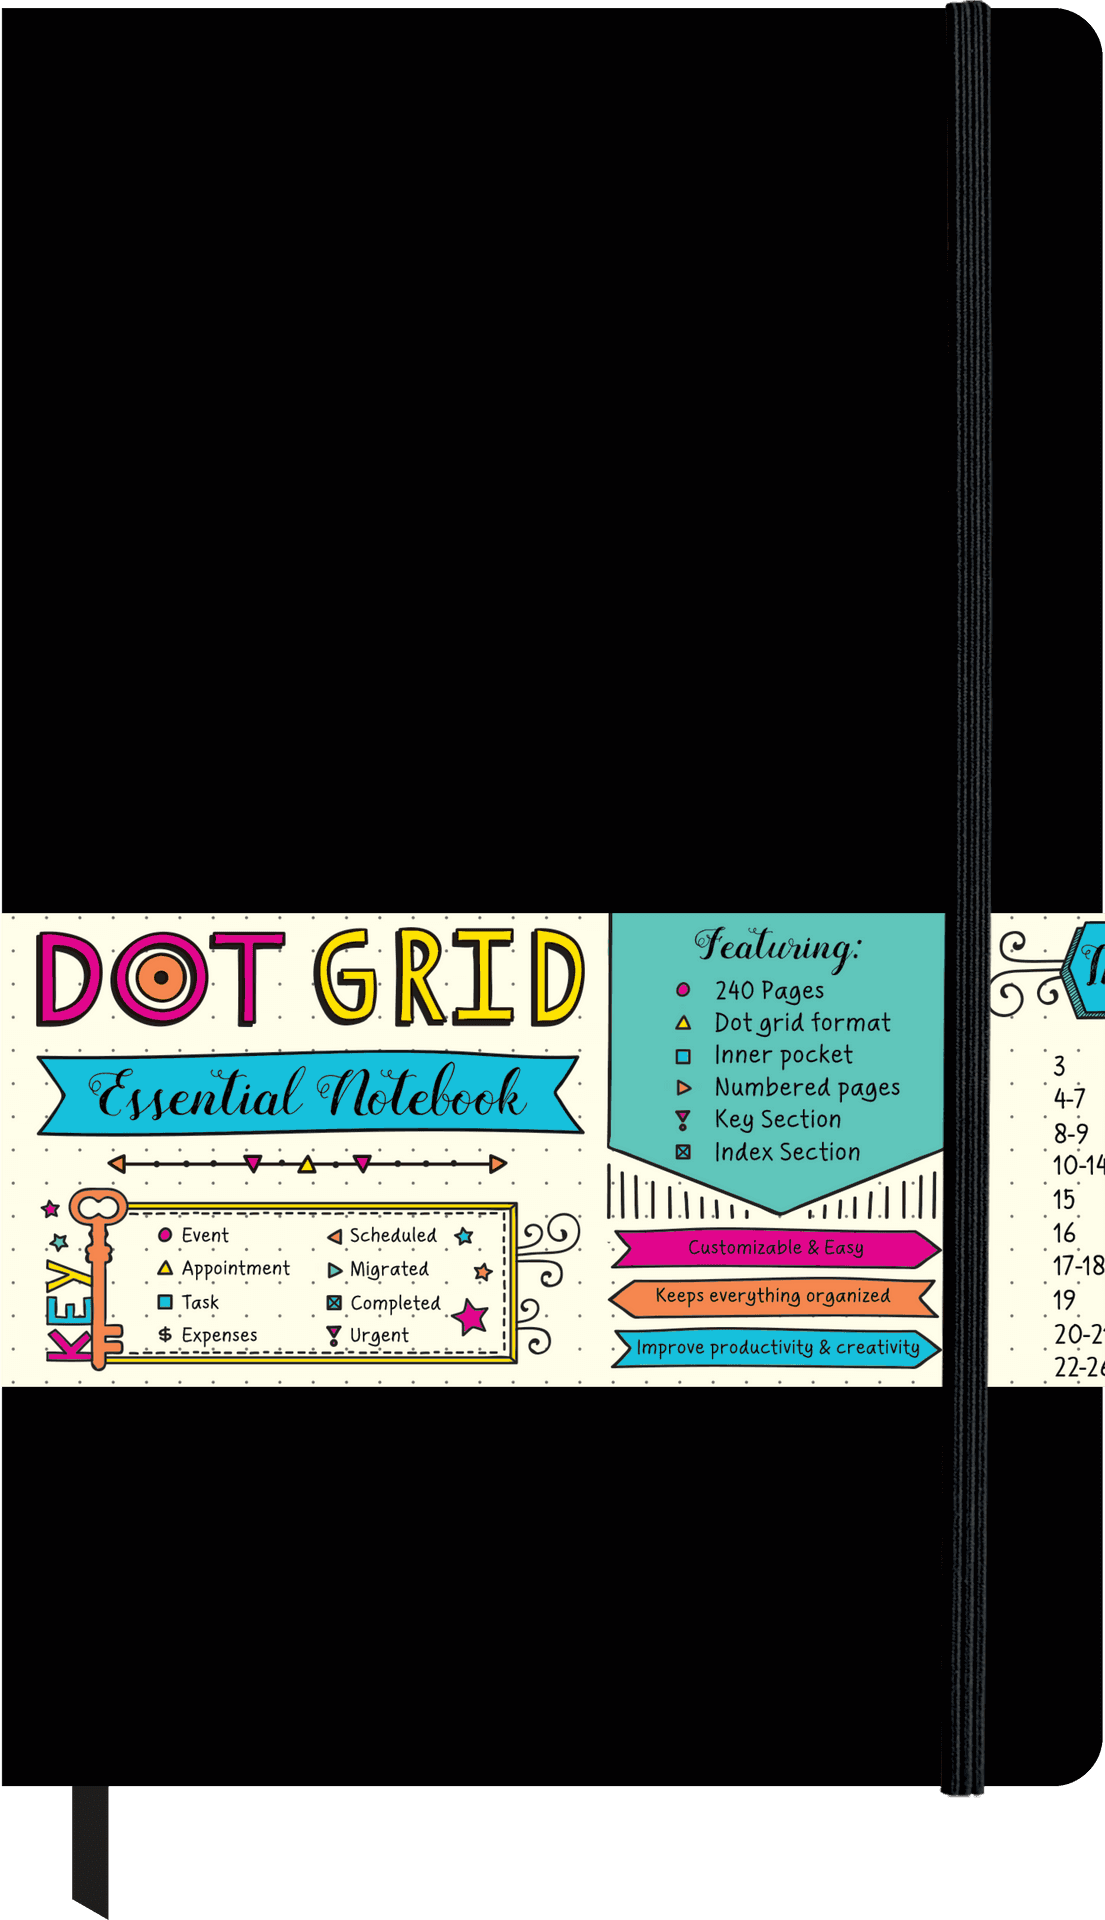 Dot Grid Essential Notebook Cover PNG image